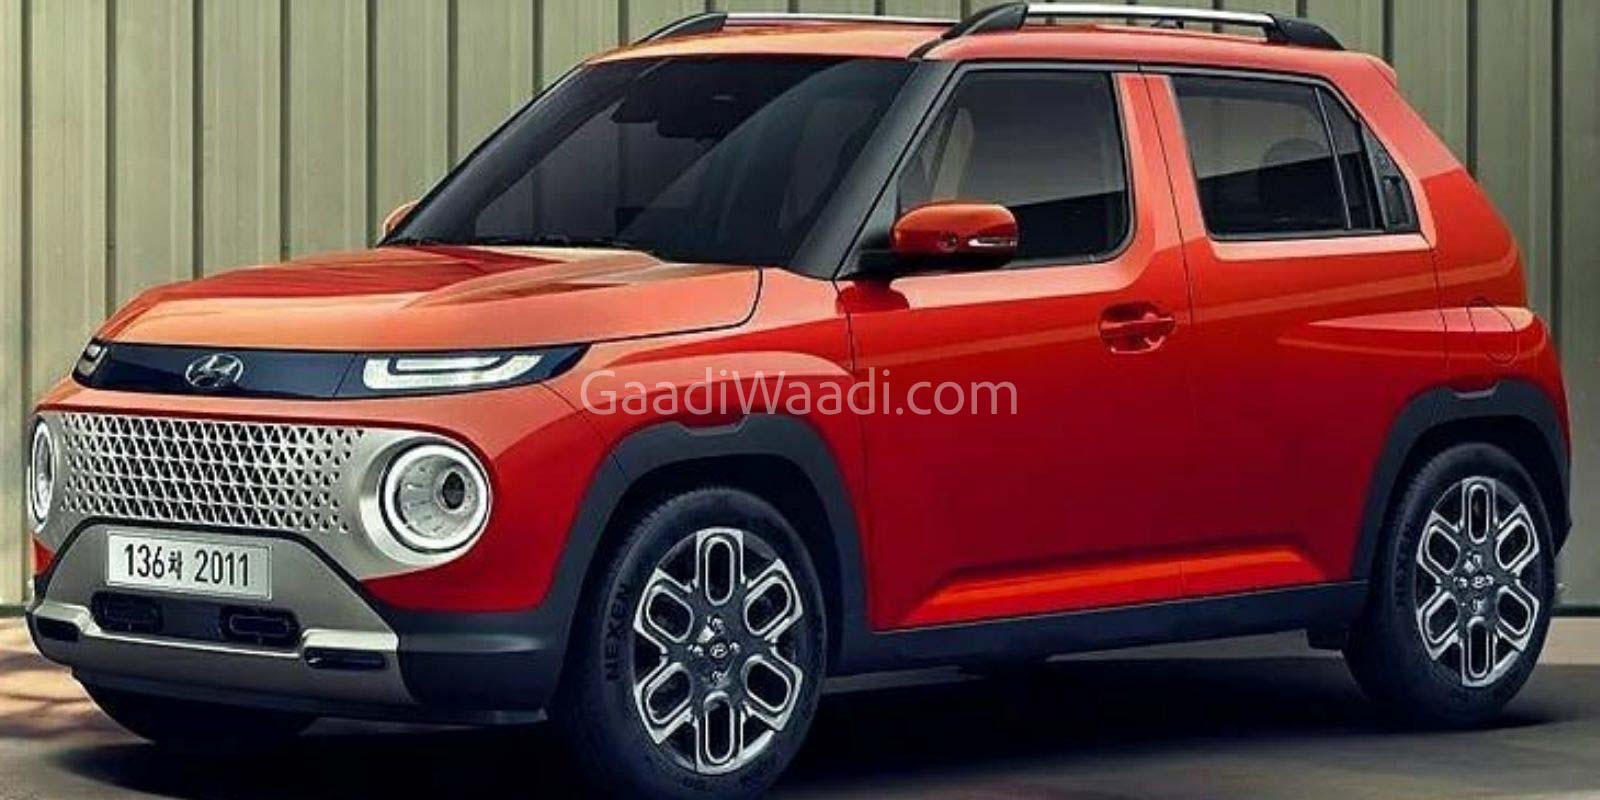 Hyundai Likely Working On A Micro SUV To Replace Santro